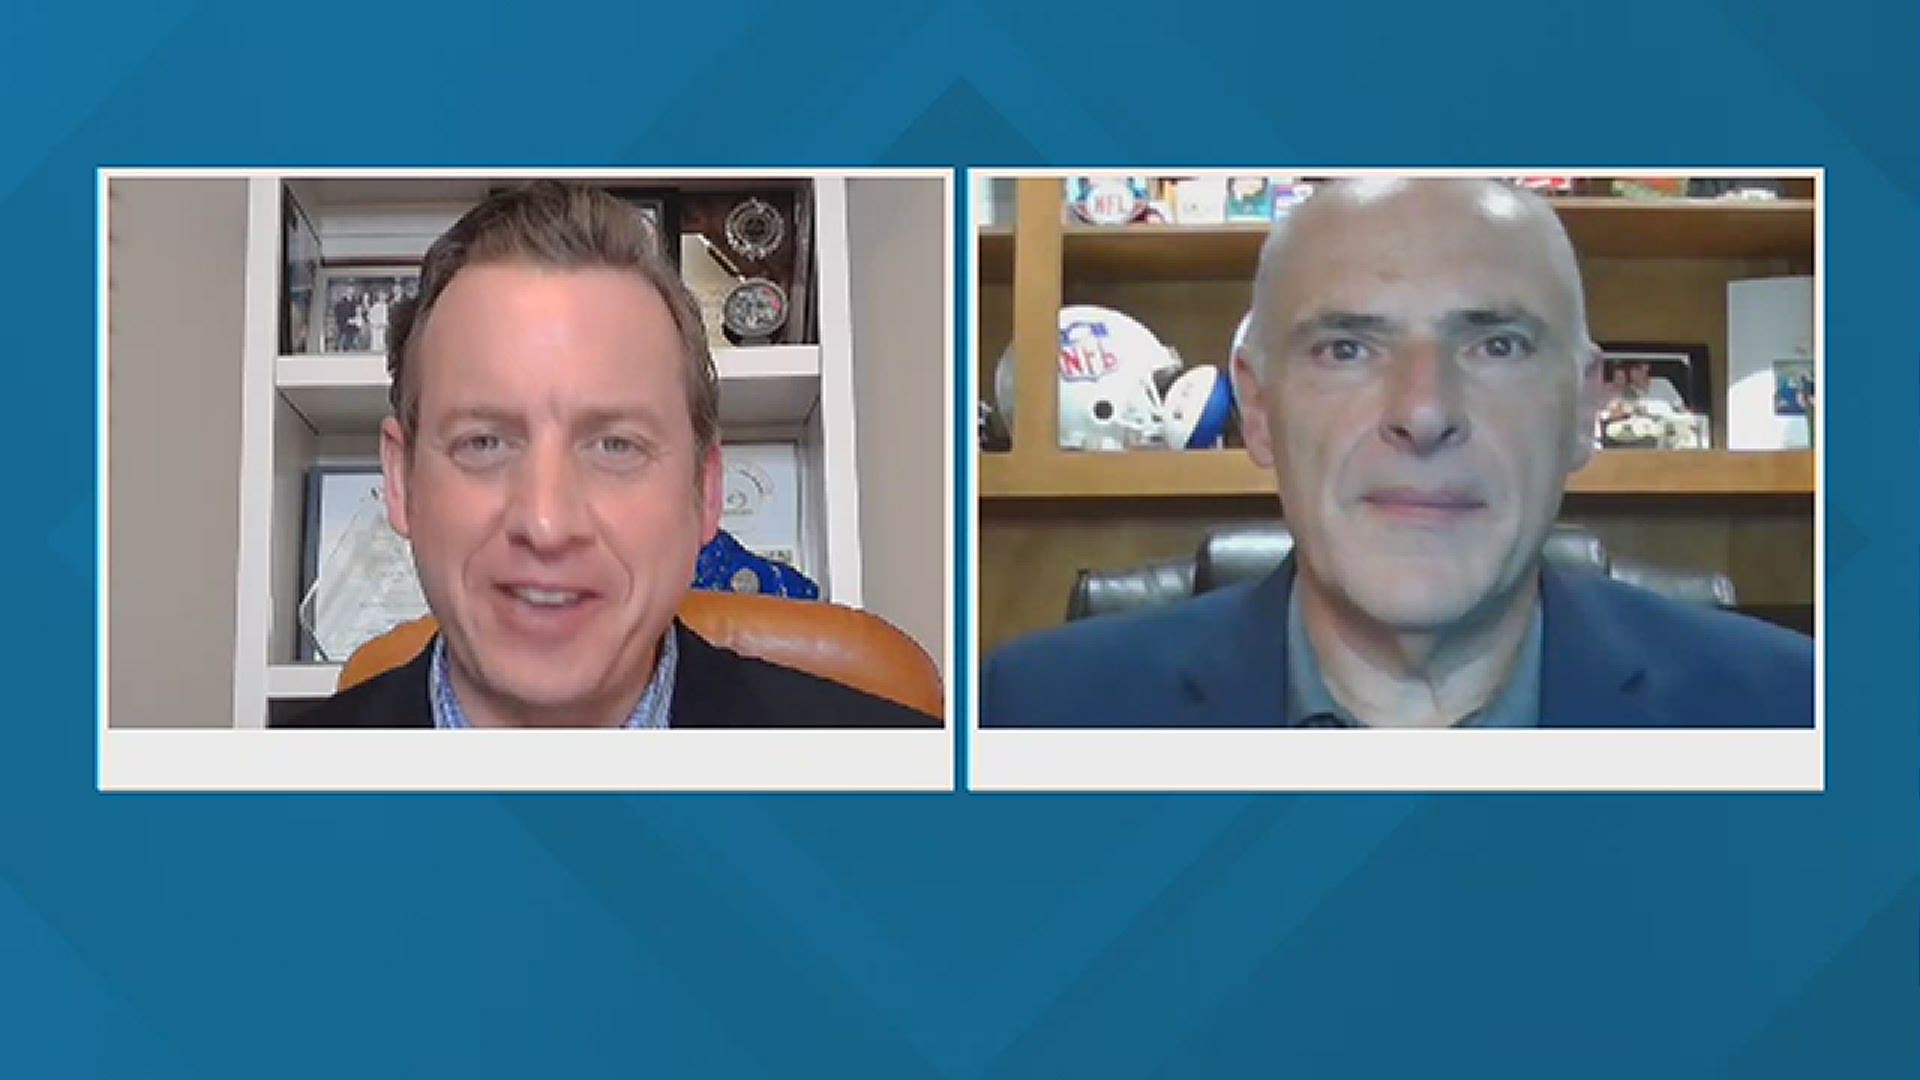 WGRZ Sports Director Adam Benigni is joined by Vic Carucci of the Buffalo News to break down the Bills 27-17 season opening win over the Jets.